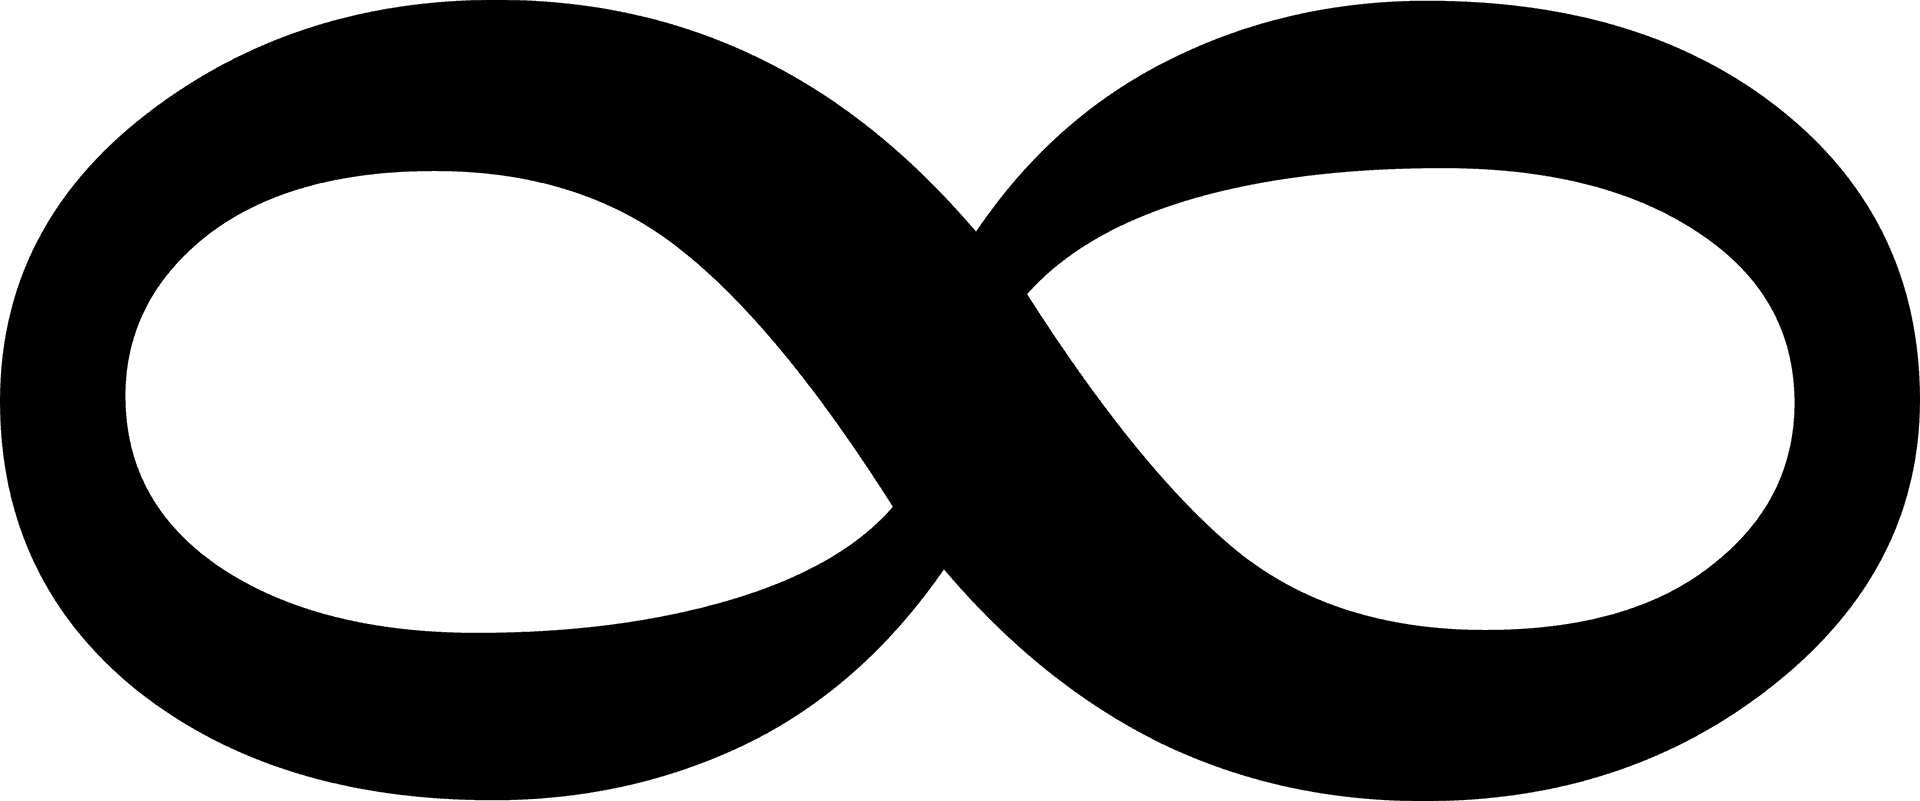 Infinity Symbol Black Silhouette PNG